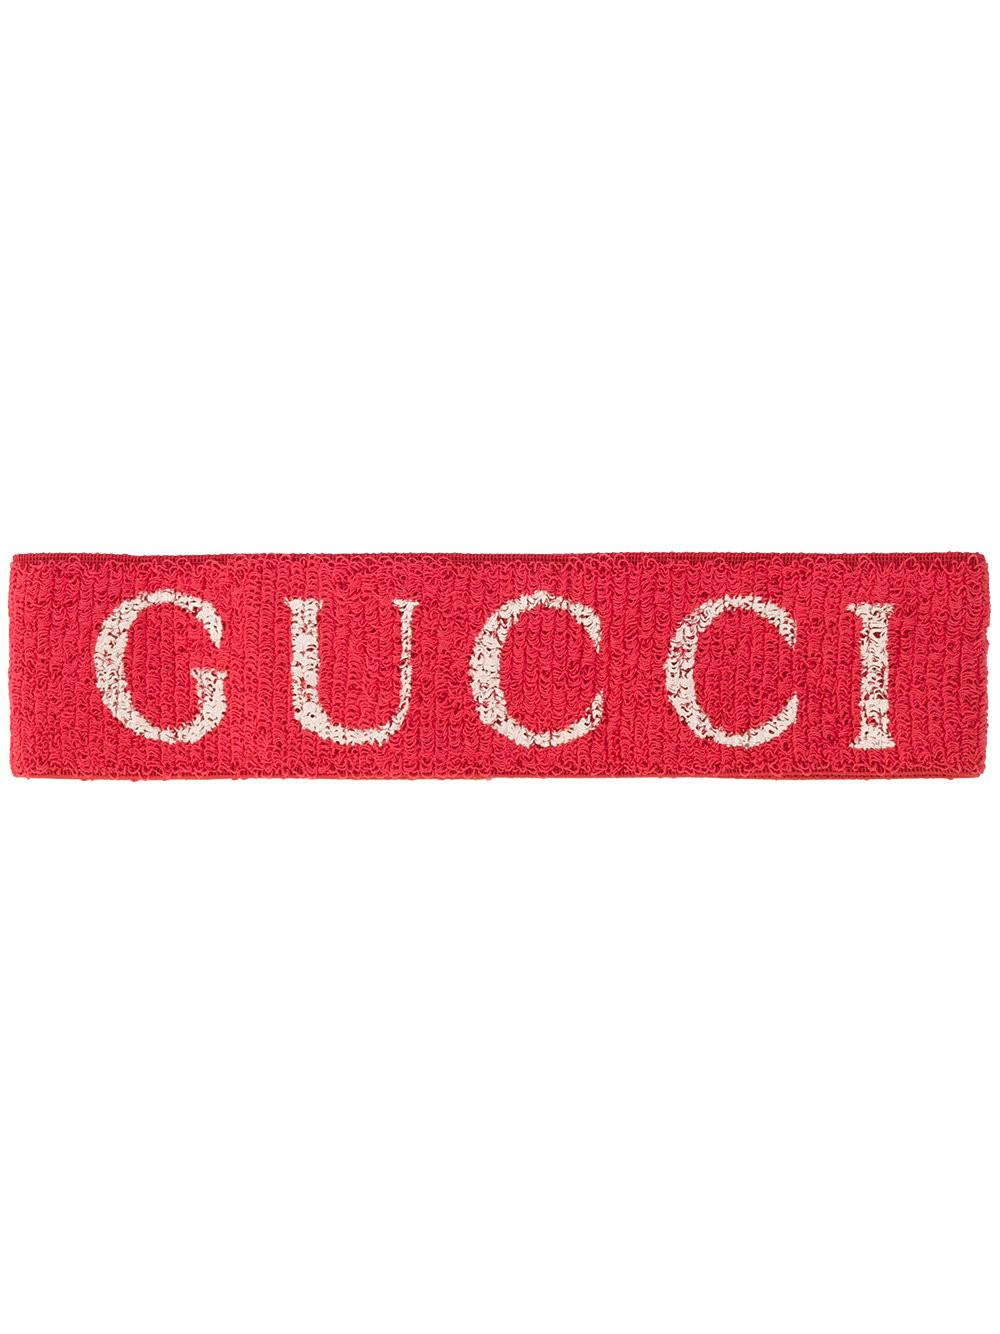 Gucci Cotton Elastic Logo Headband in Red/White (Red) - Lyst